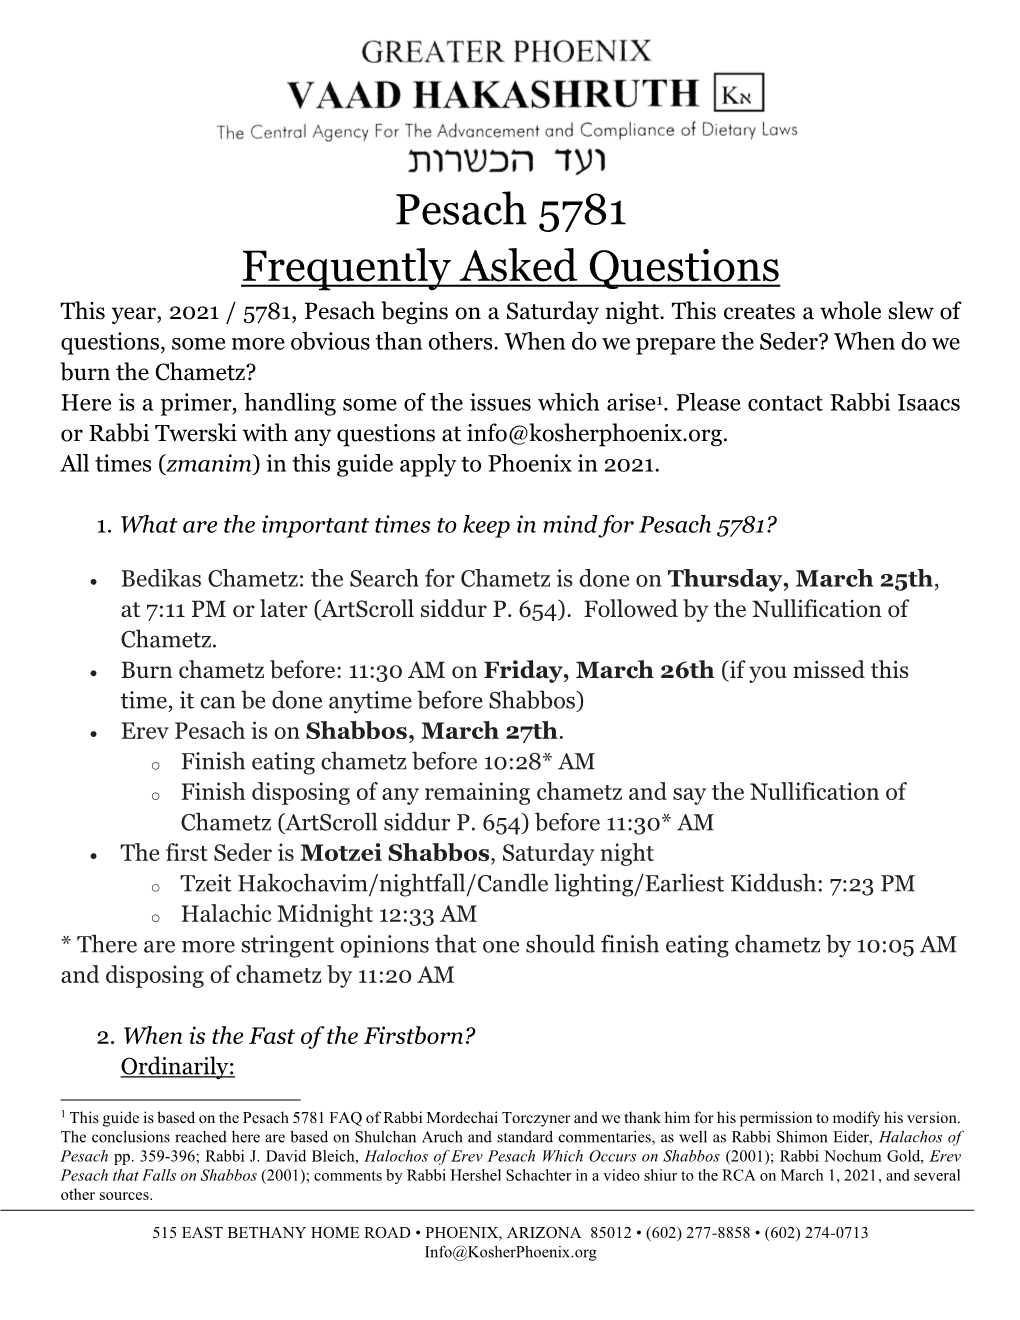 Pesach 5781 Frequently Asked Questions This Year, 2021 / 5781, Pesach Begins on a Saturday Night